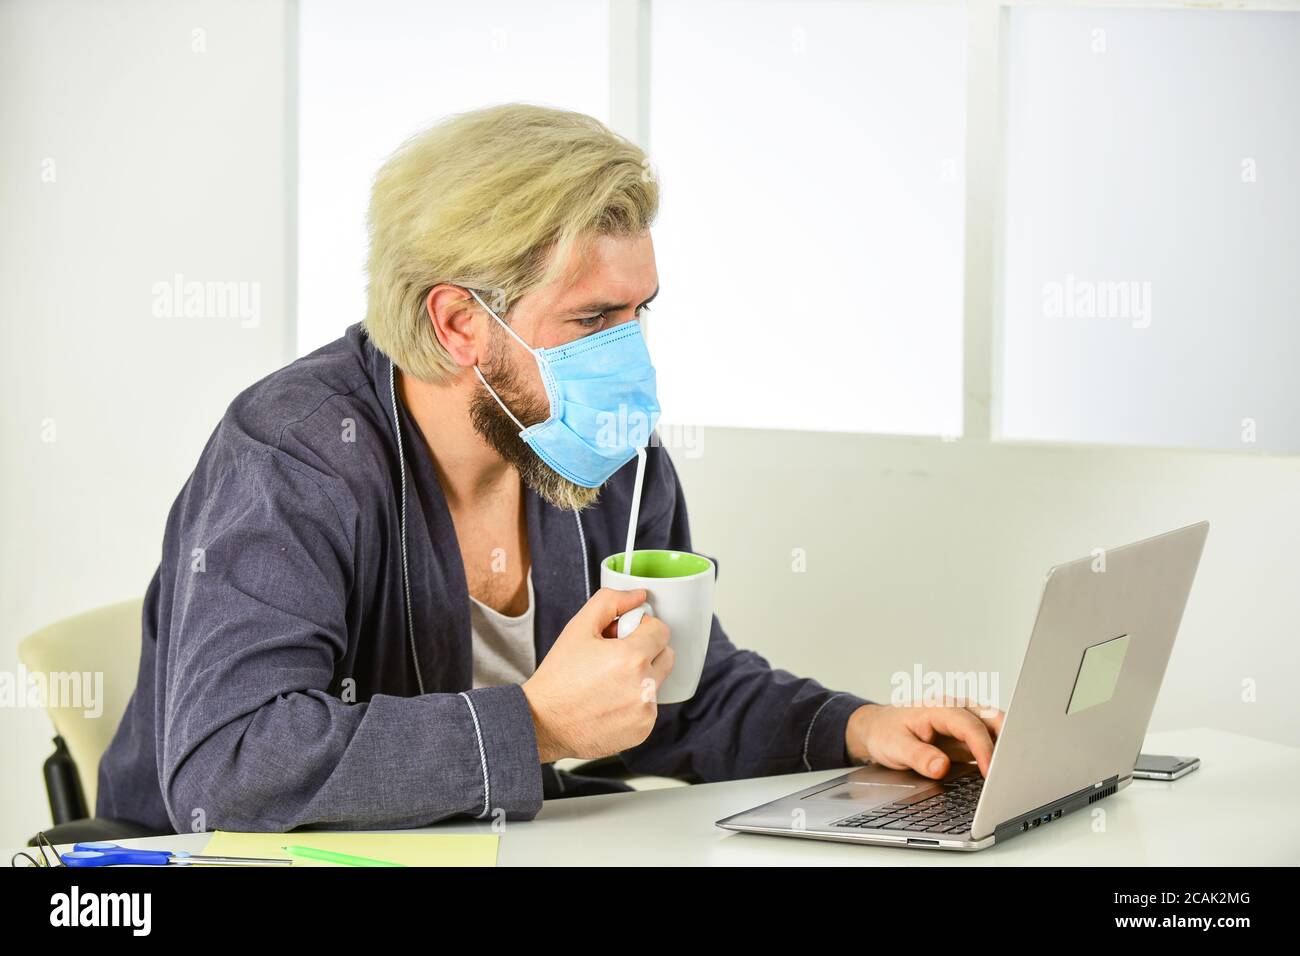 remote-based job. online shopping. man in respirator protective mask in office. work on a remote site. distance learning. infection control and prevention measures. keep your distance. Stock Photo